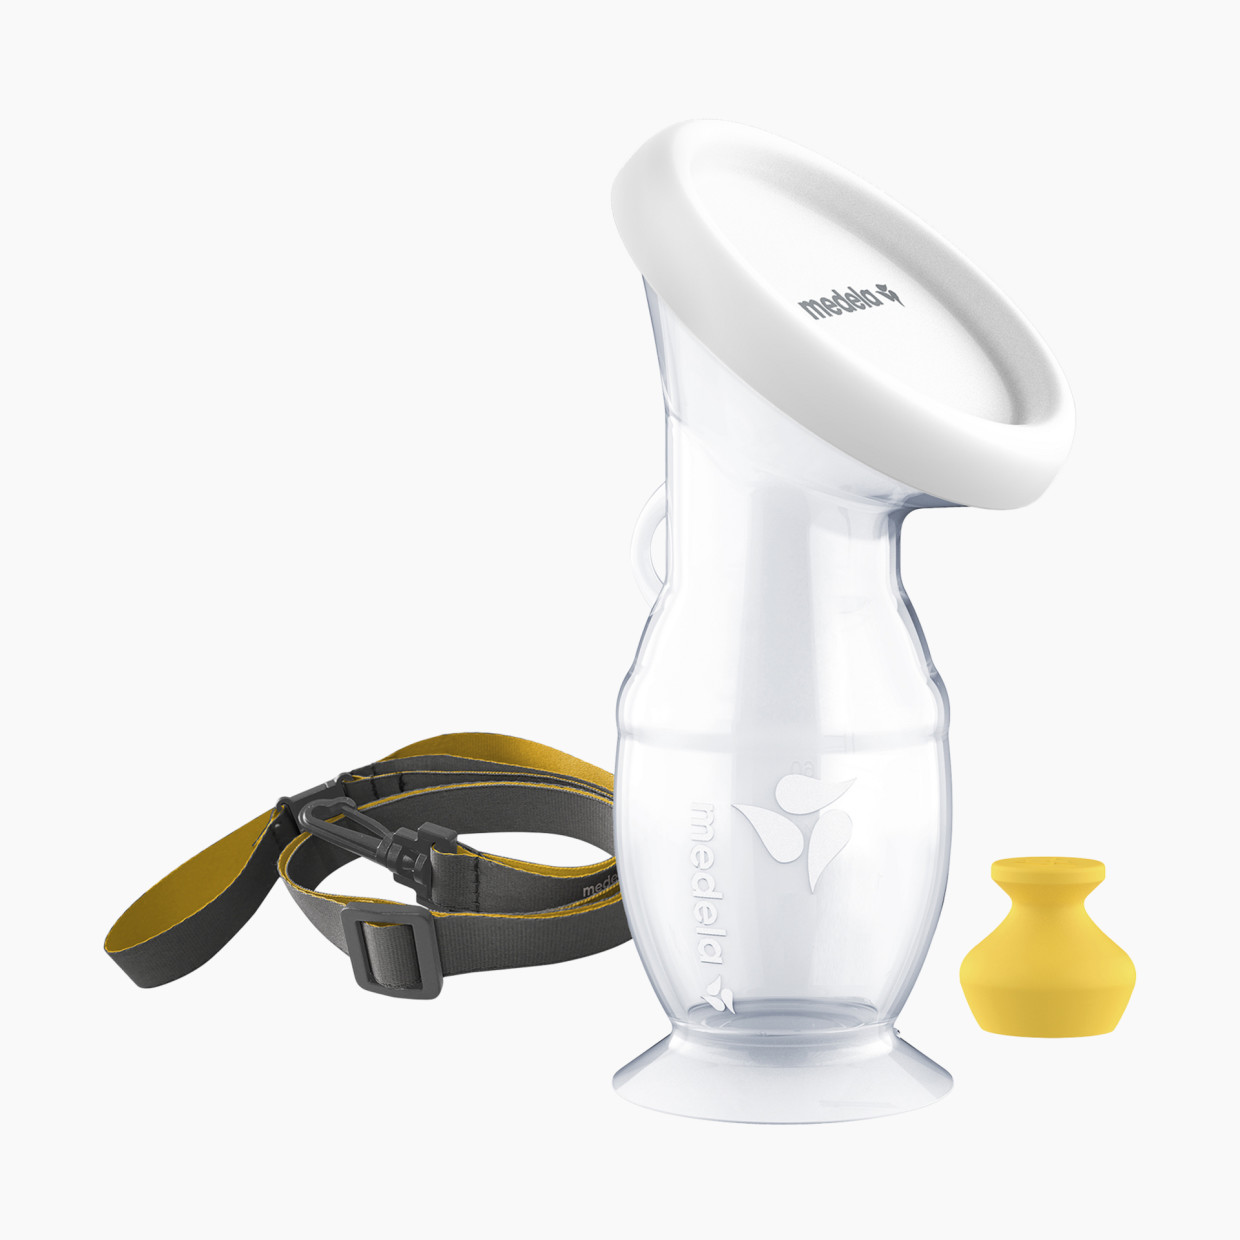 Medela Introduces New Silicone Breast Milk Collector to Ensure  Breastfeeding Families Provide Every Precious Drop to Baby